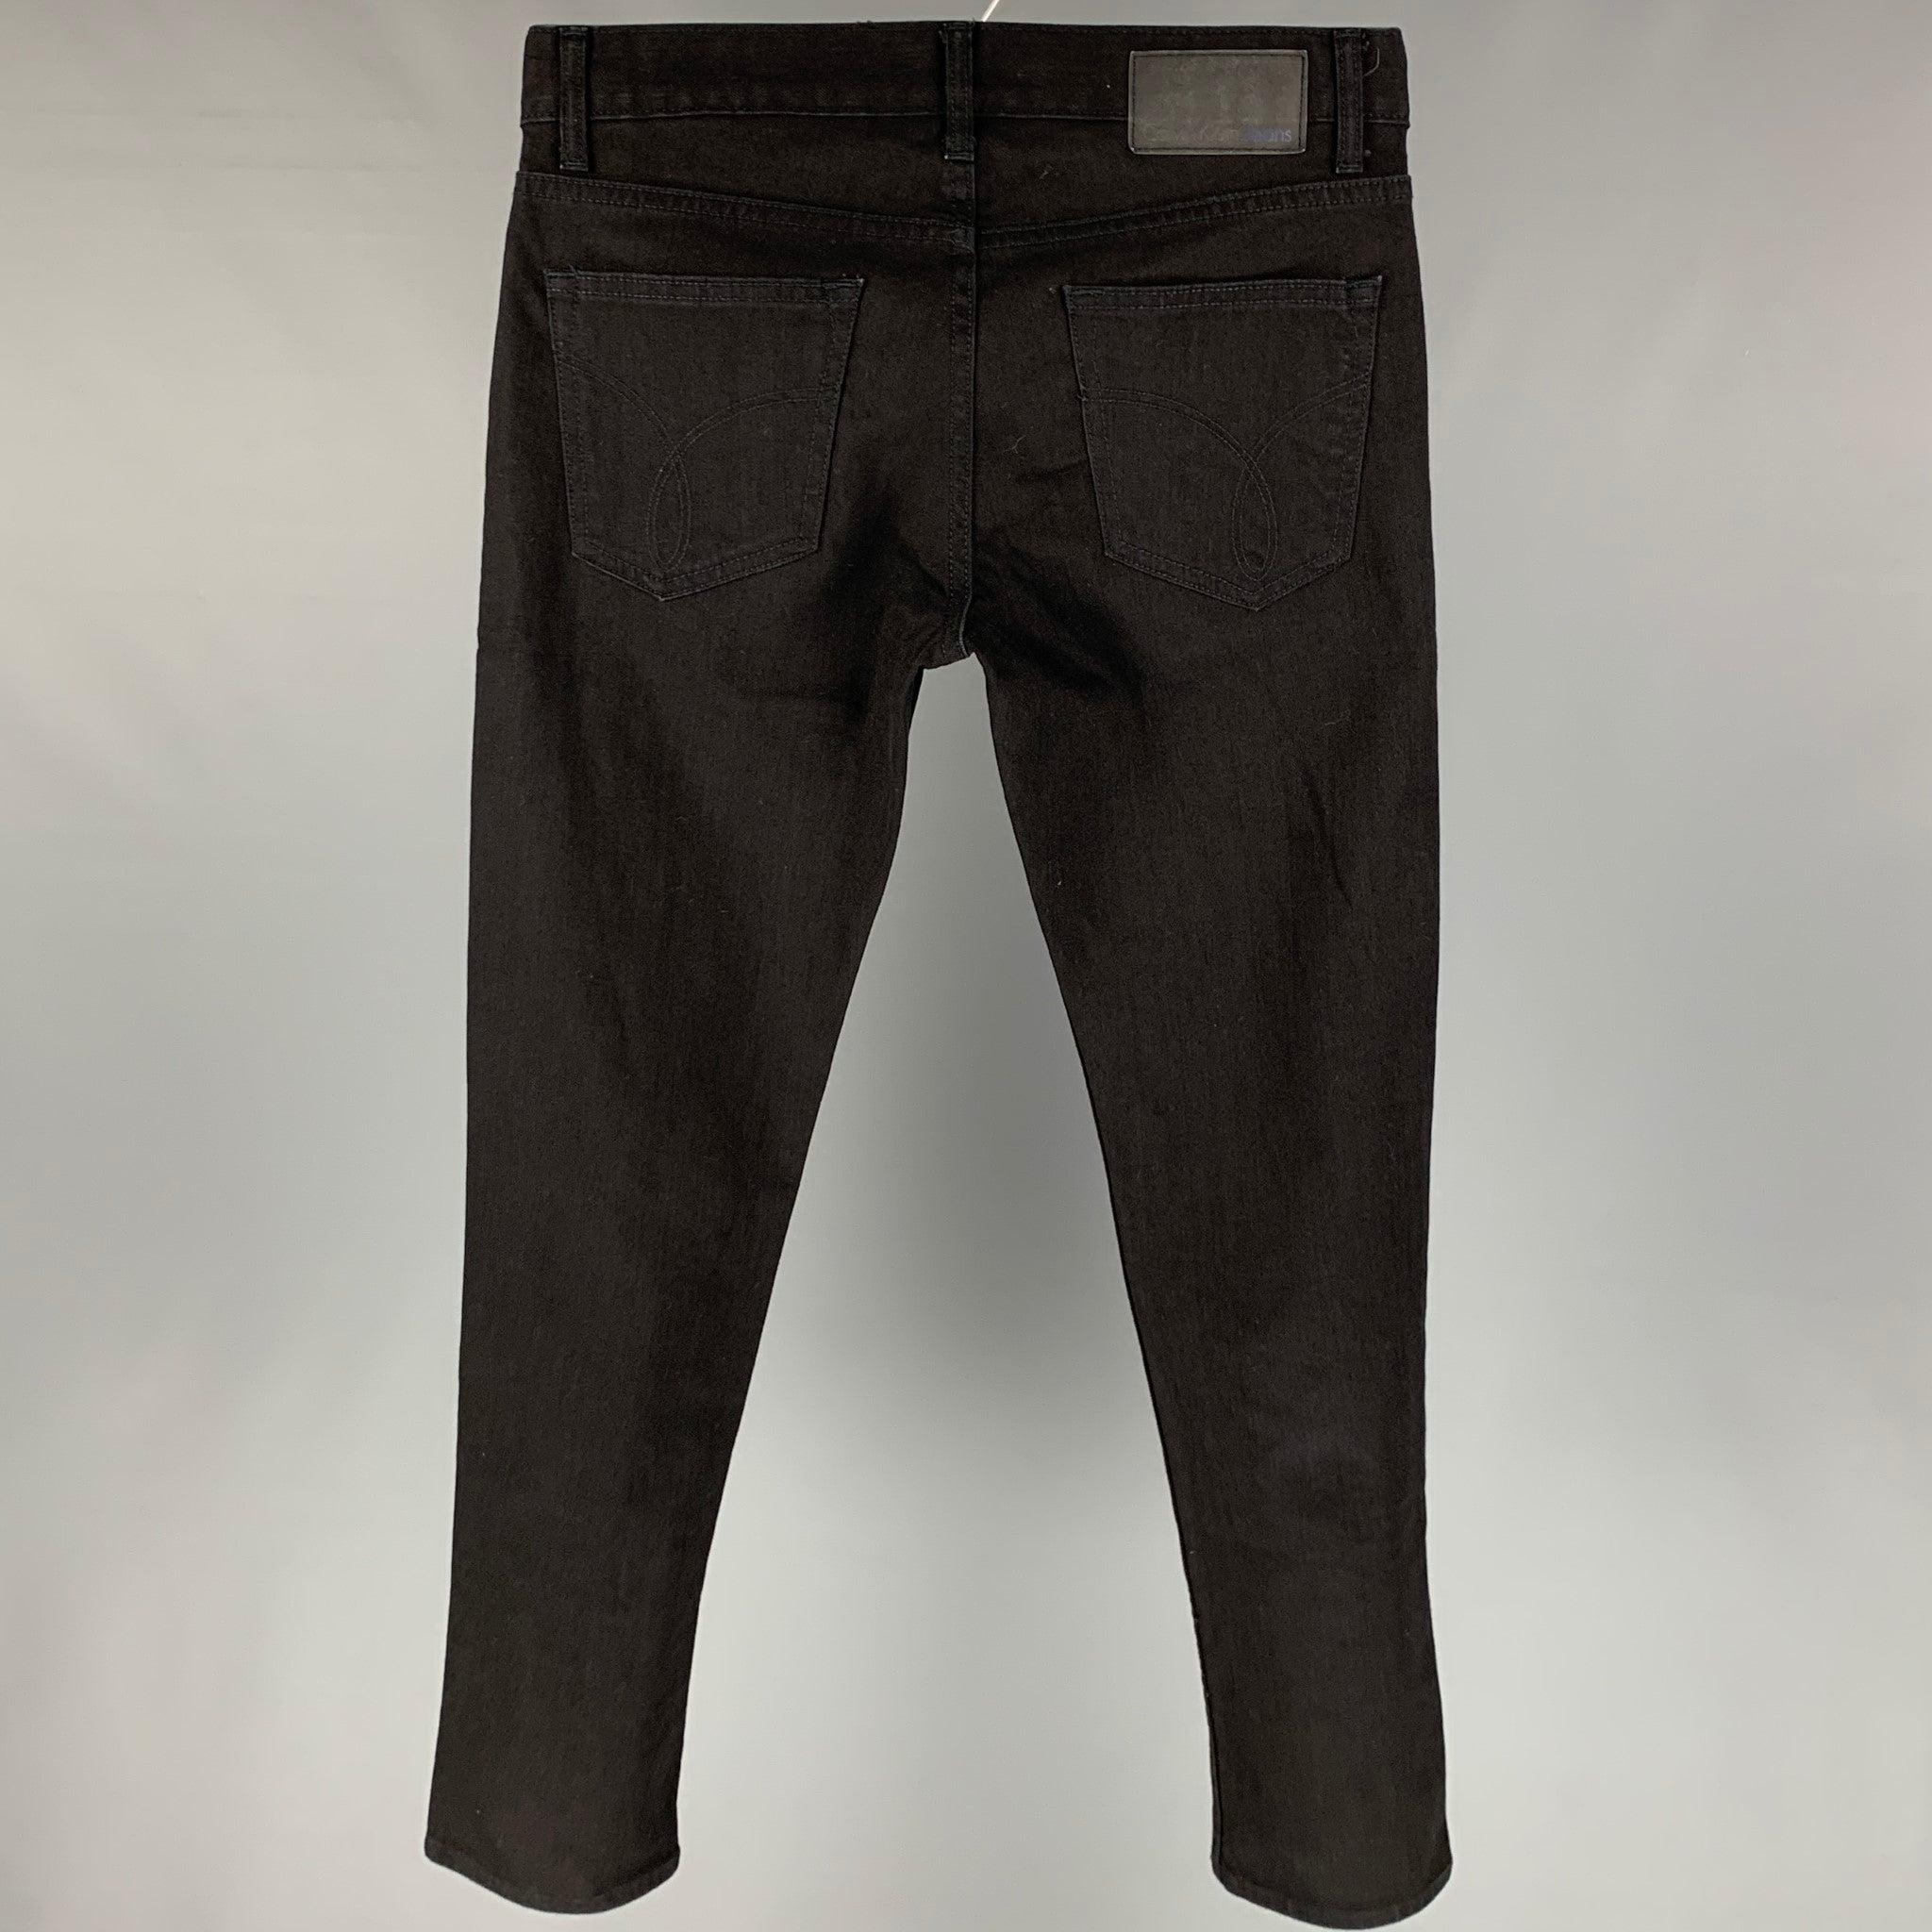 CALVIN KLEIN jeans comes in a black cotton featuring a slim fit and a zip fly closure.
 Very Good
 Pre-Owned Condition. 
 

 Marked:  31x30 
 

 Measurements: 
  Waist: 31 inches Rise: 10 inches Inseam: 31 inches 
  
  
  
 Sui Generis Reference: